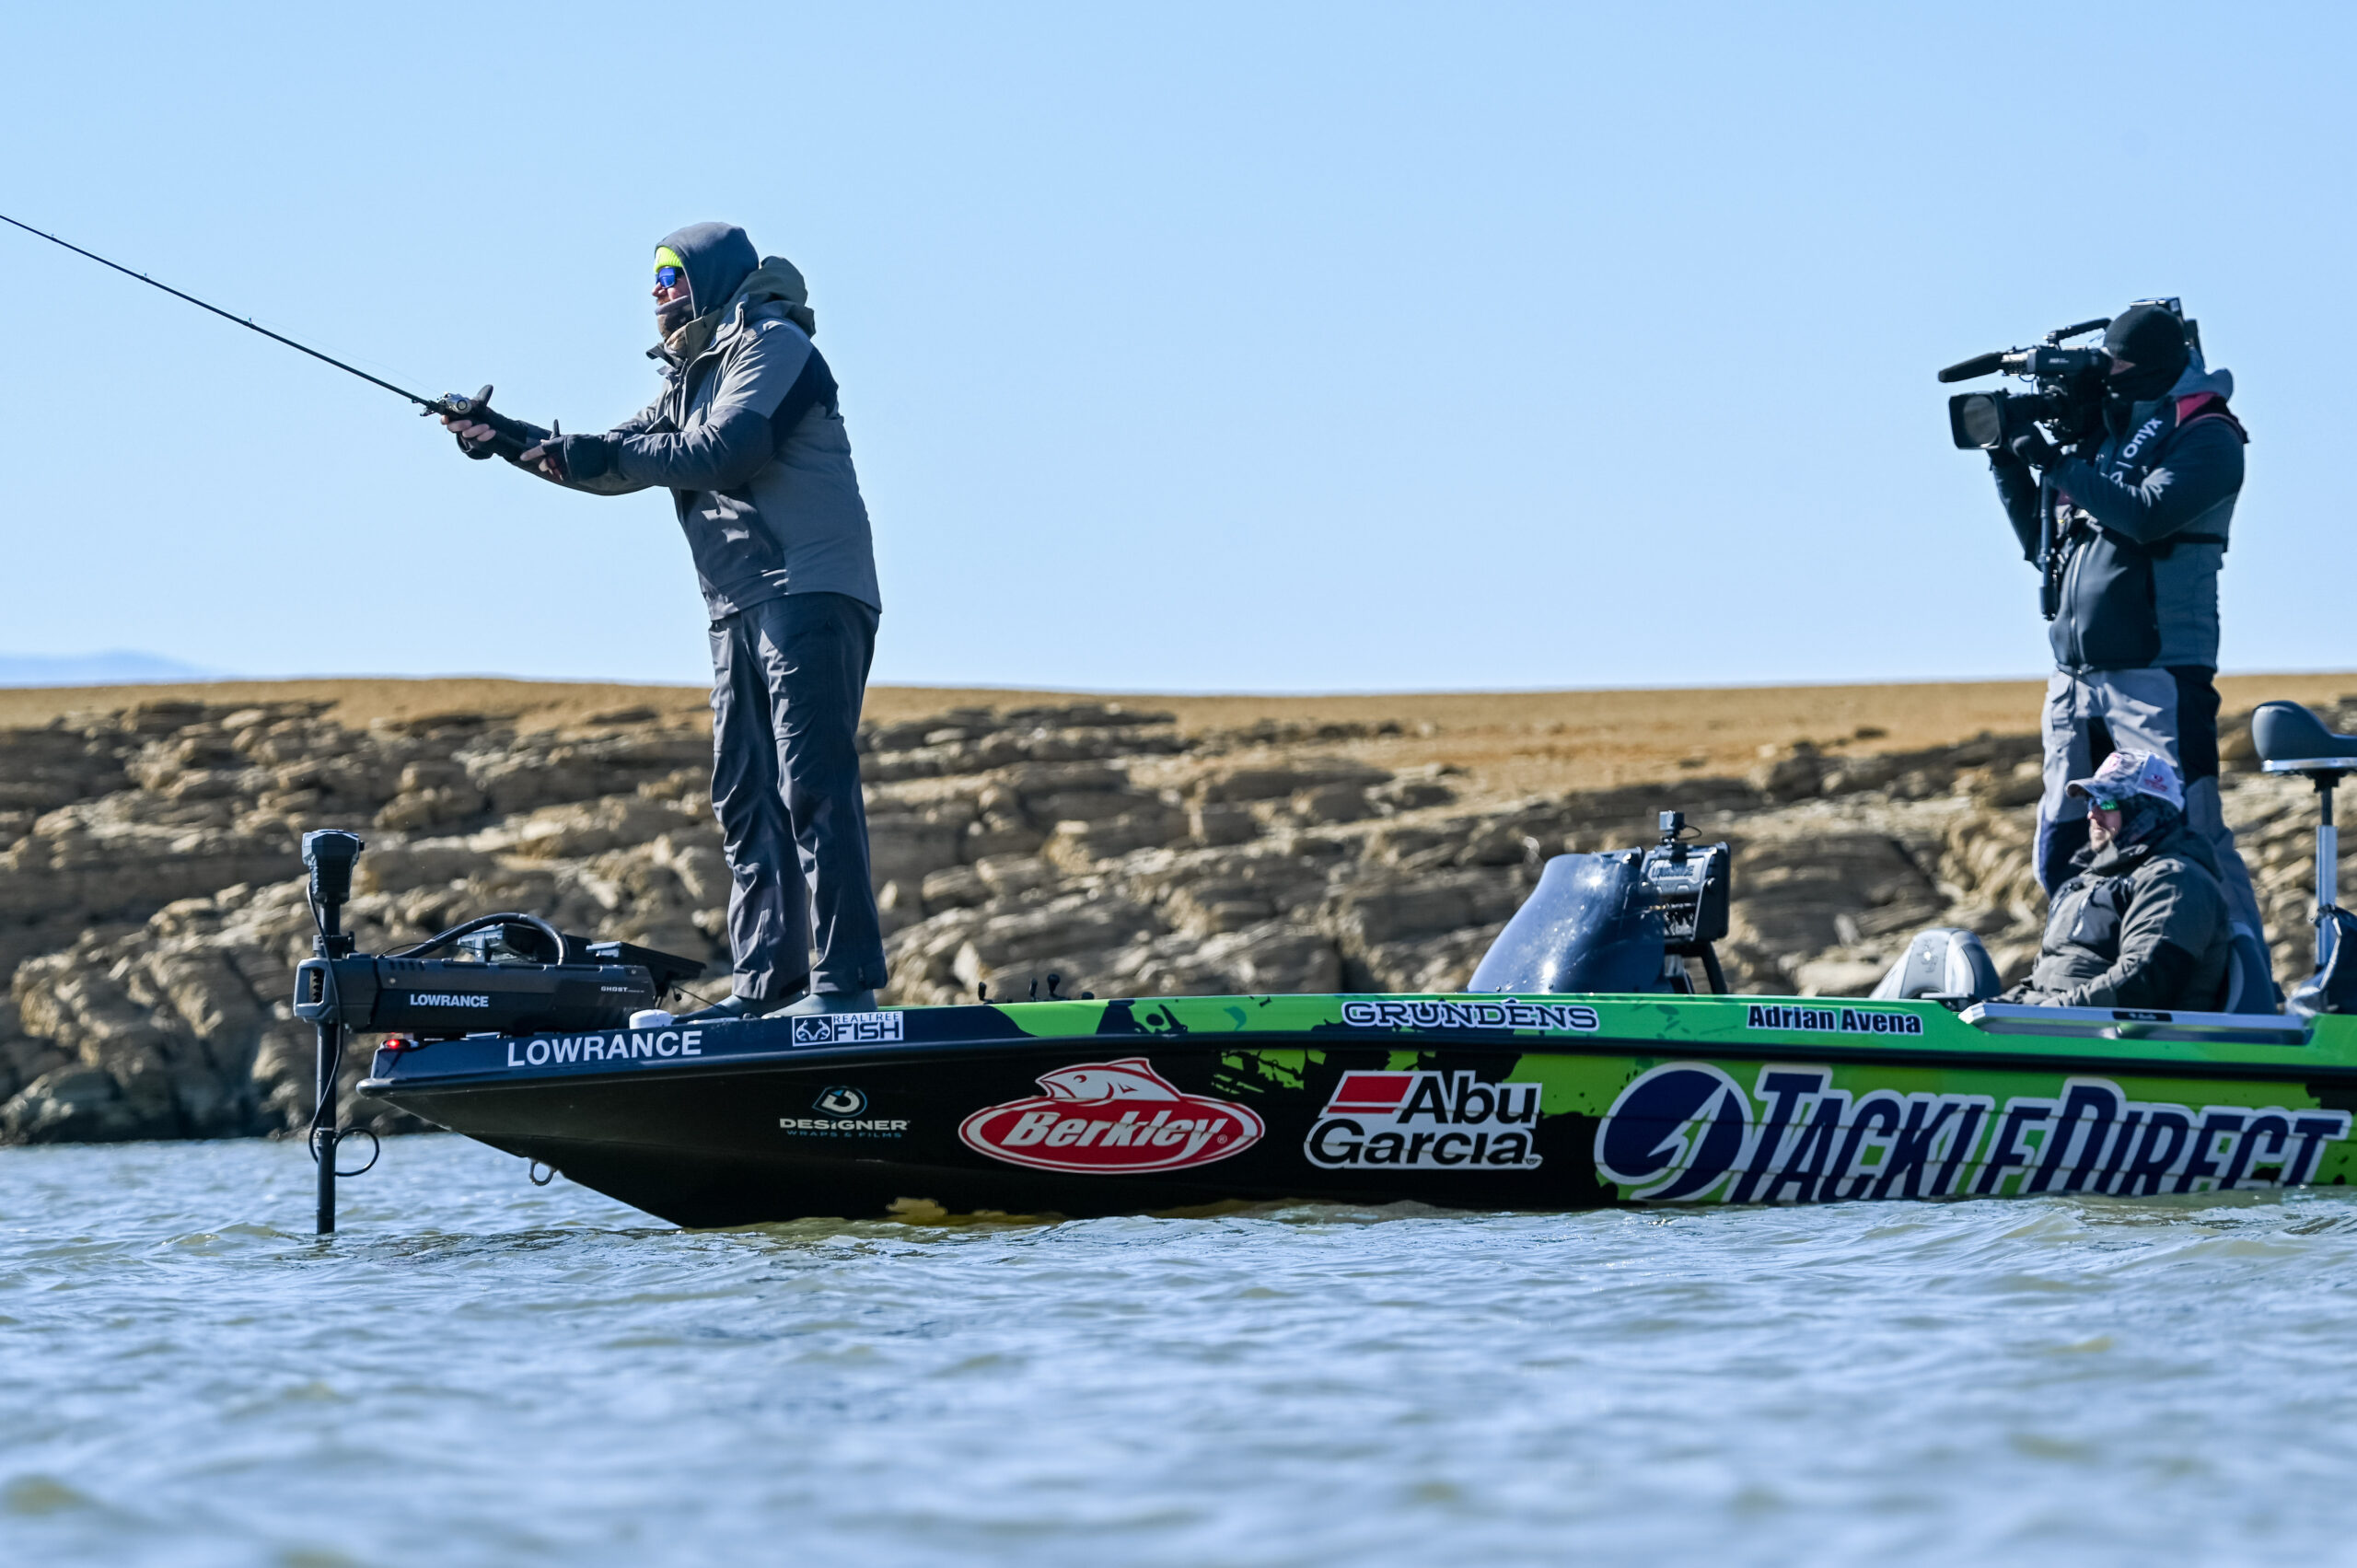 Adrian Avena surges to Group A Qualifying Round win at U.S. Air